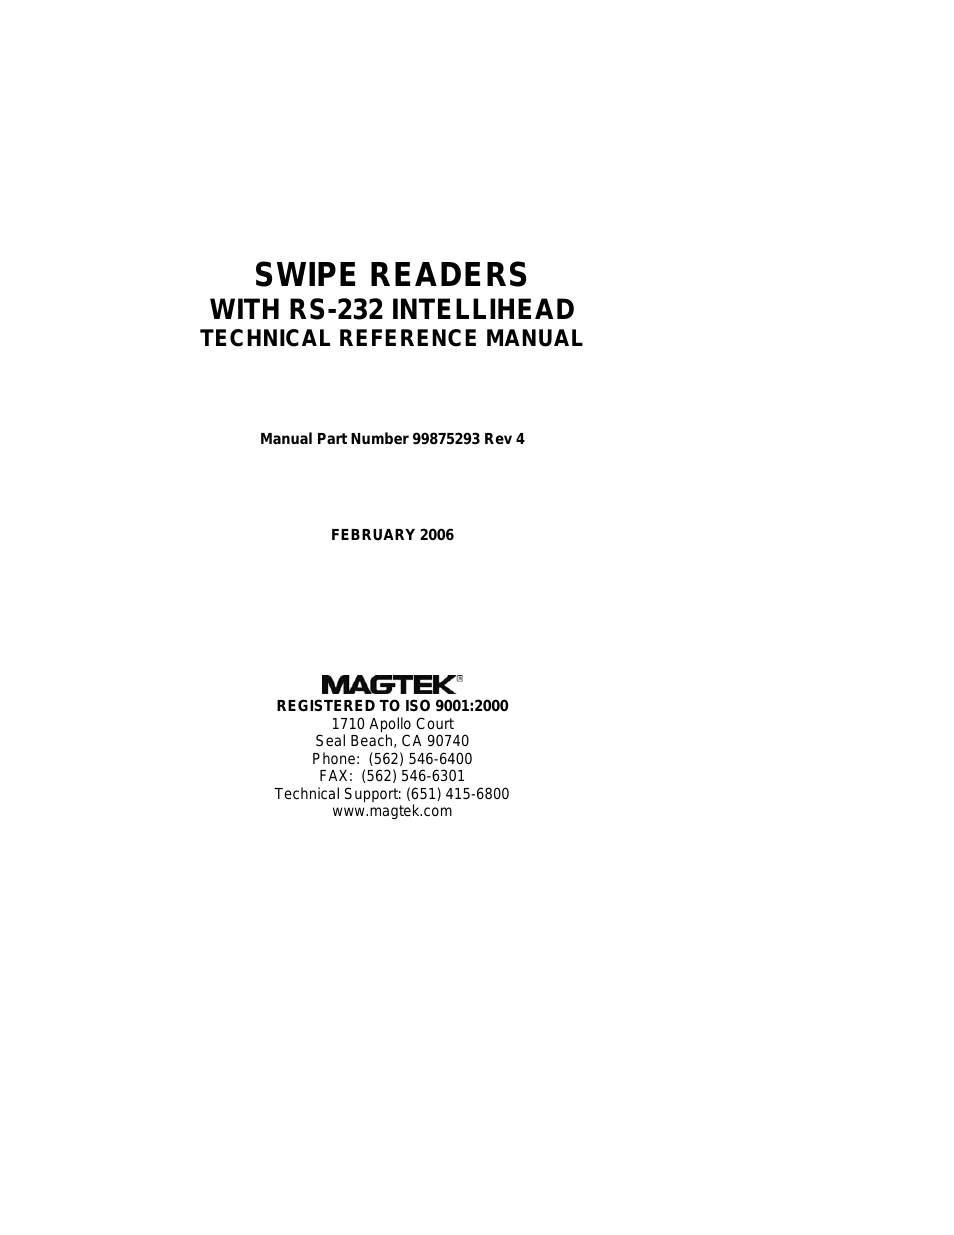 SWIPE READERS WITH RS-232